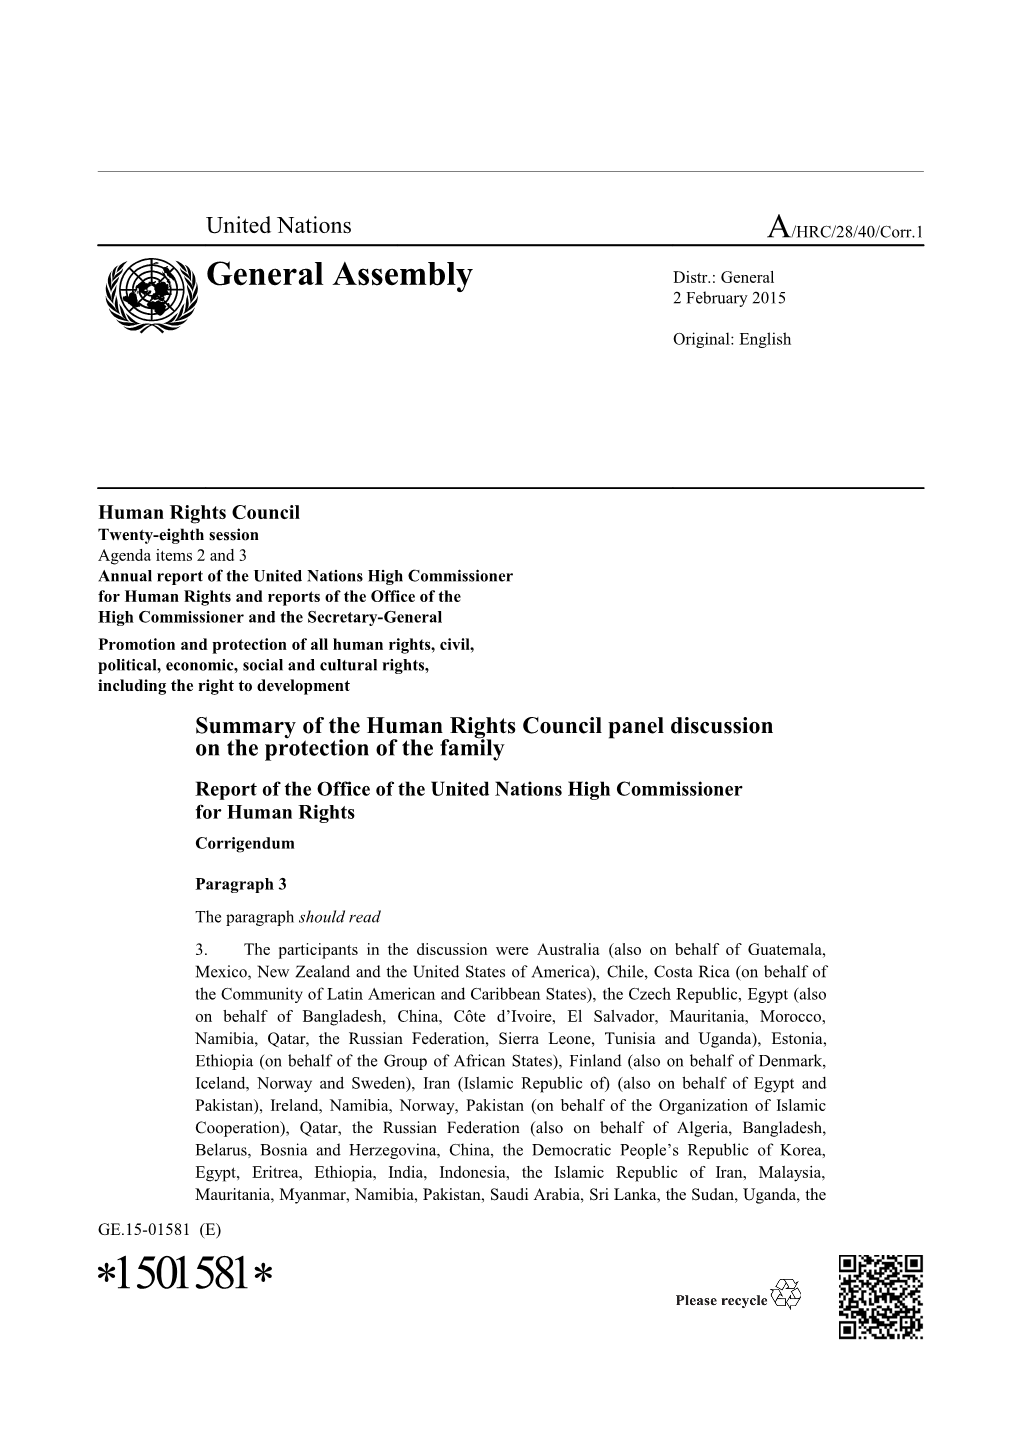 Corrigendum of the Summary of the Human Rights Council Panel Discussion on the Protection